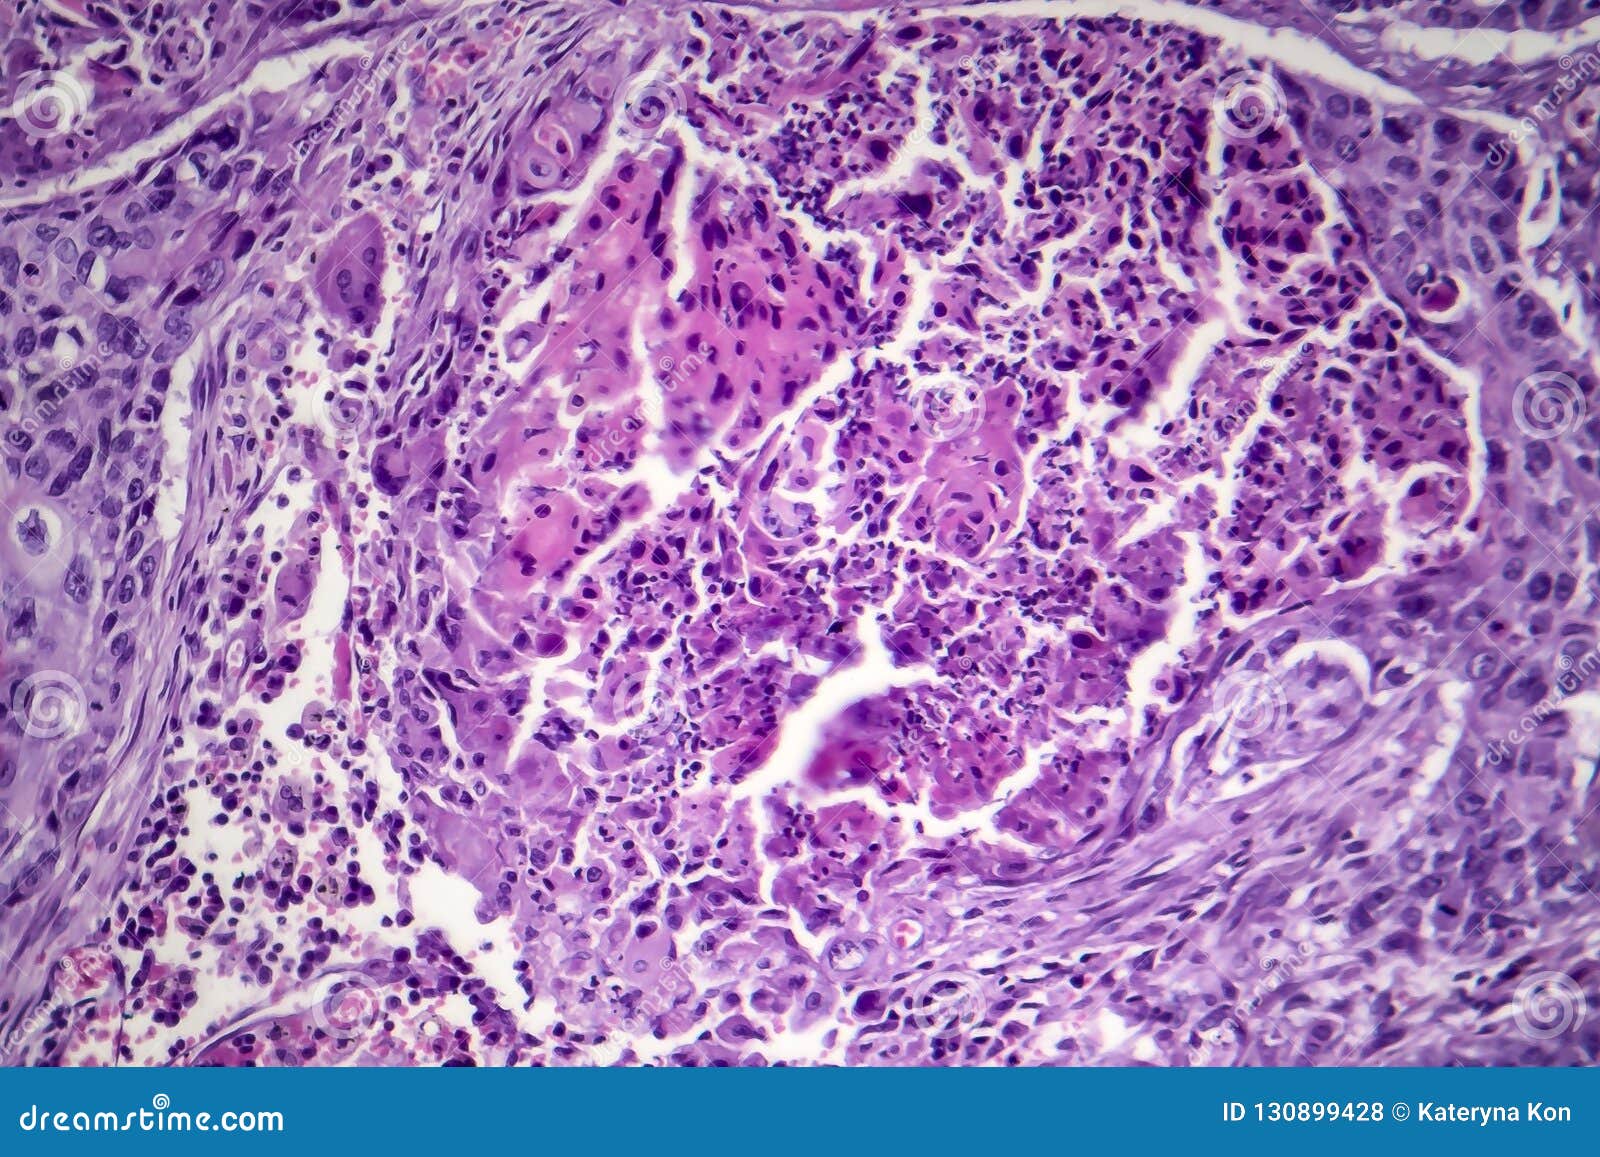 Squamous Cell Carcinoma Of The Lung Stock Photo Image of